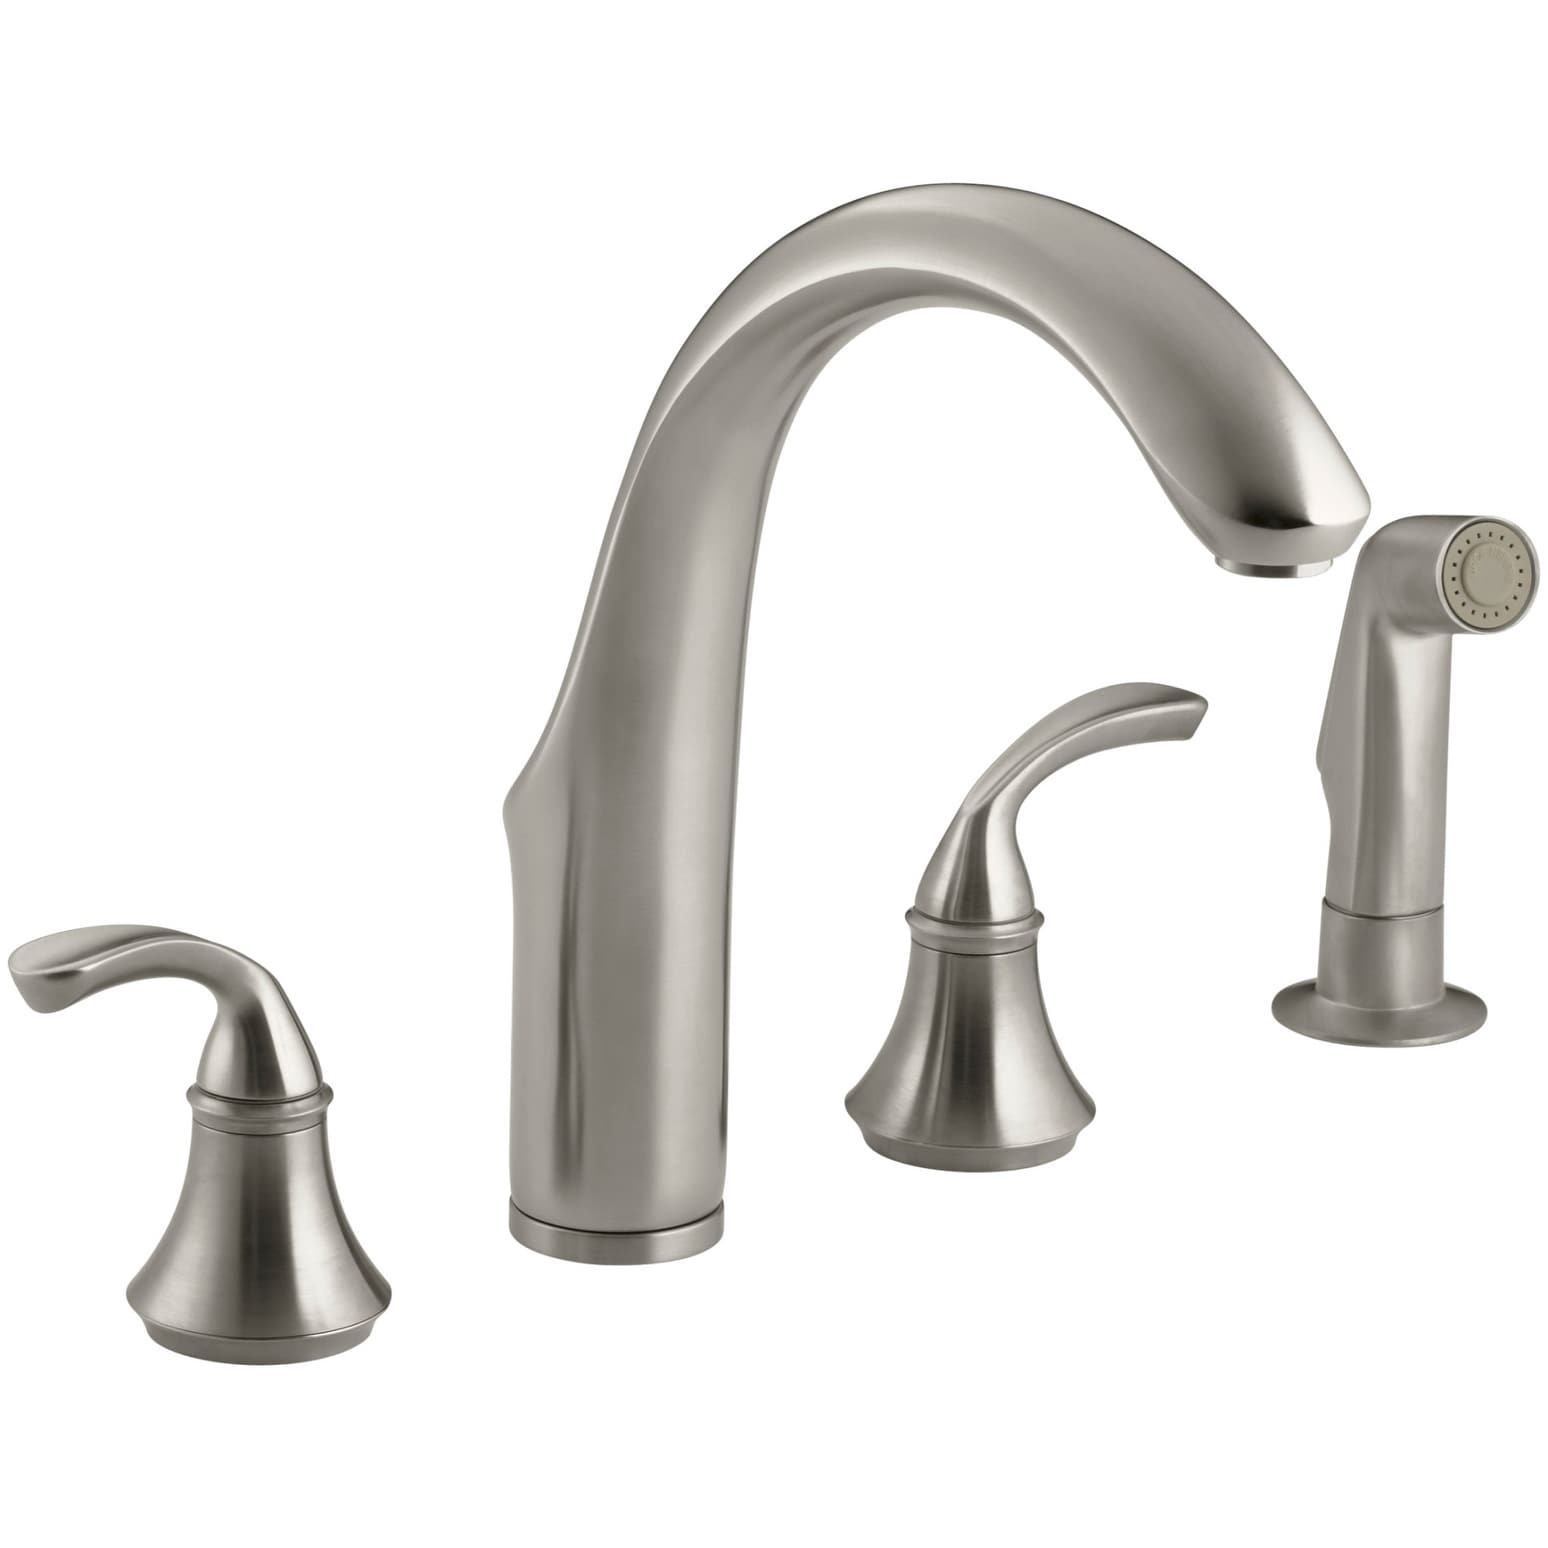 Shop Kohler K 10445 Widespread Kitchen Faucet With Sidespray From The Forte Collection Free Shipping Today Overstock 16319111